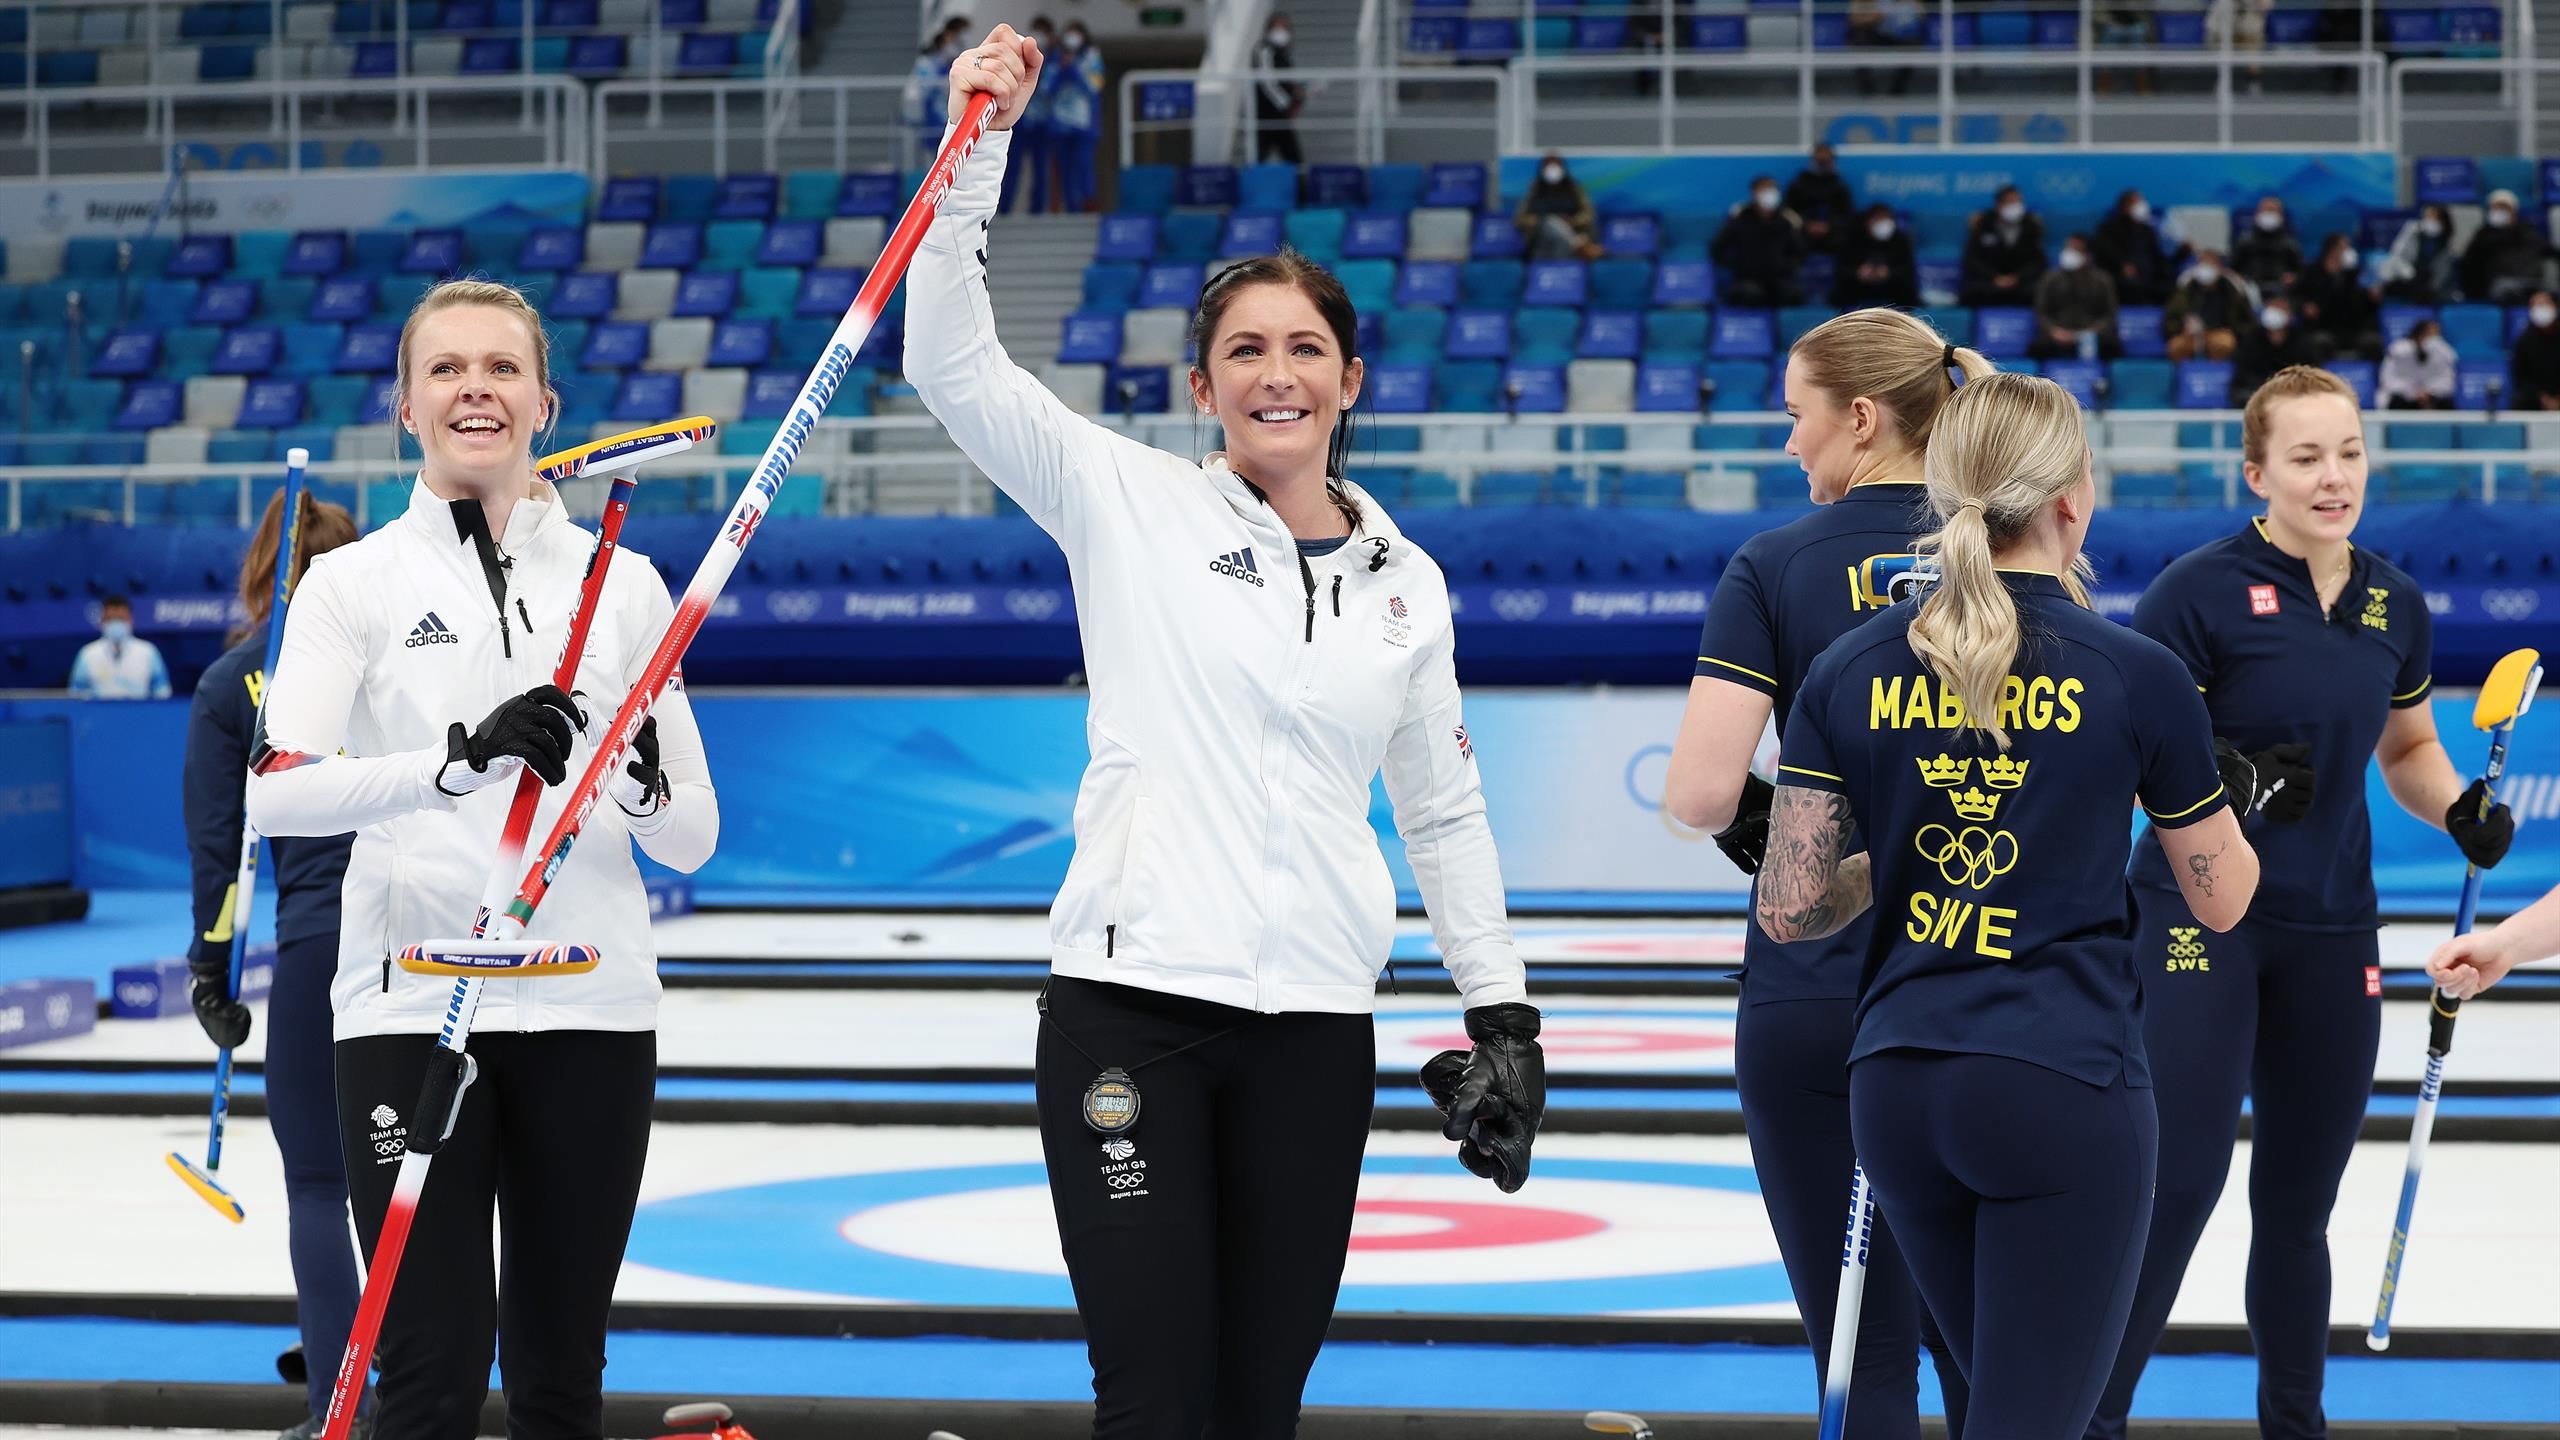 Team GB v Japan: When is women's curling final? UK time, how to